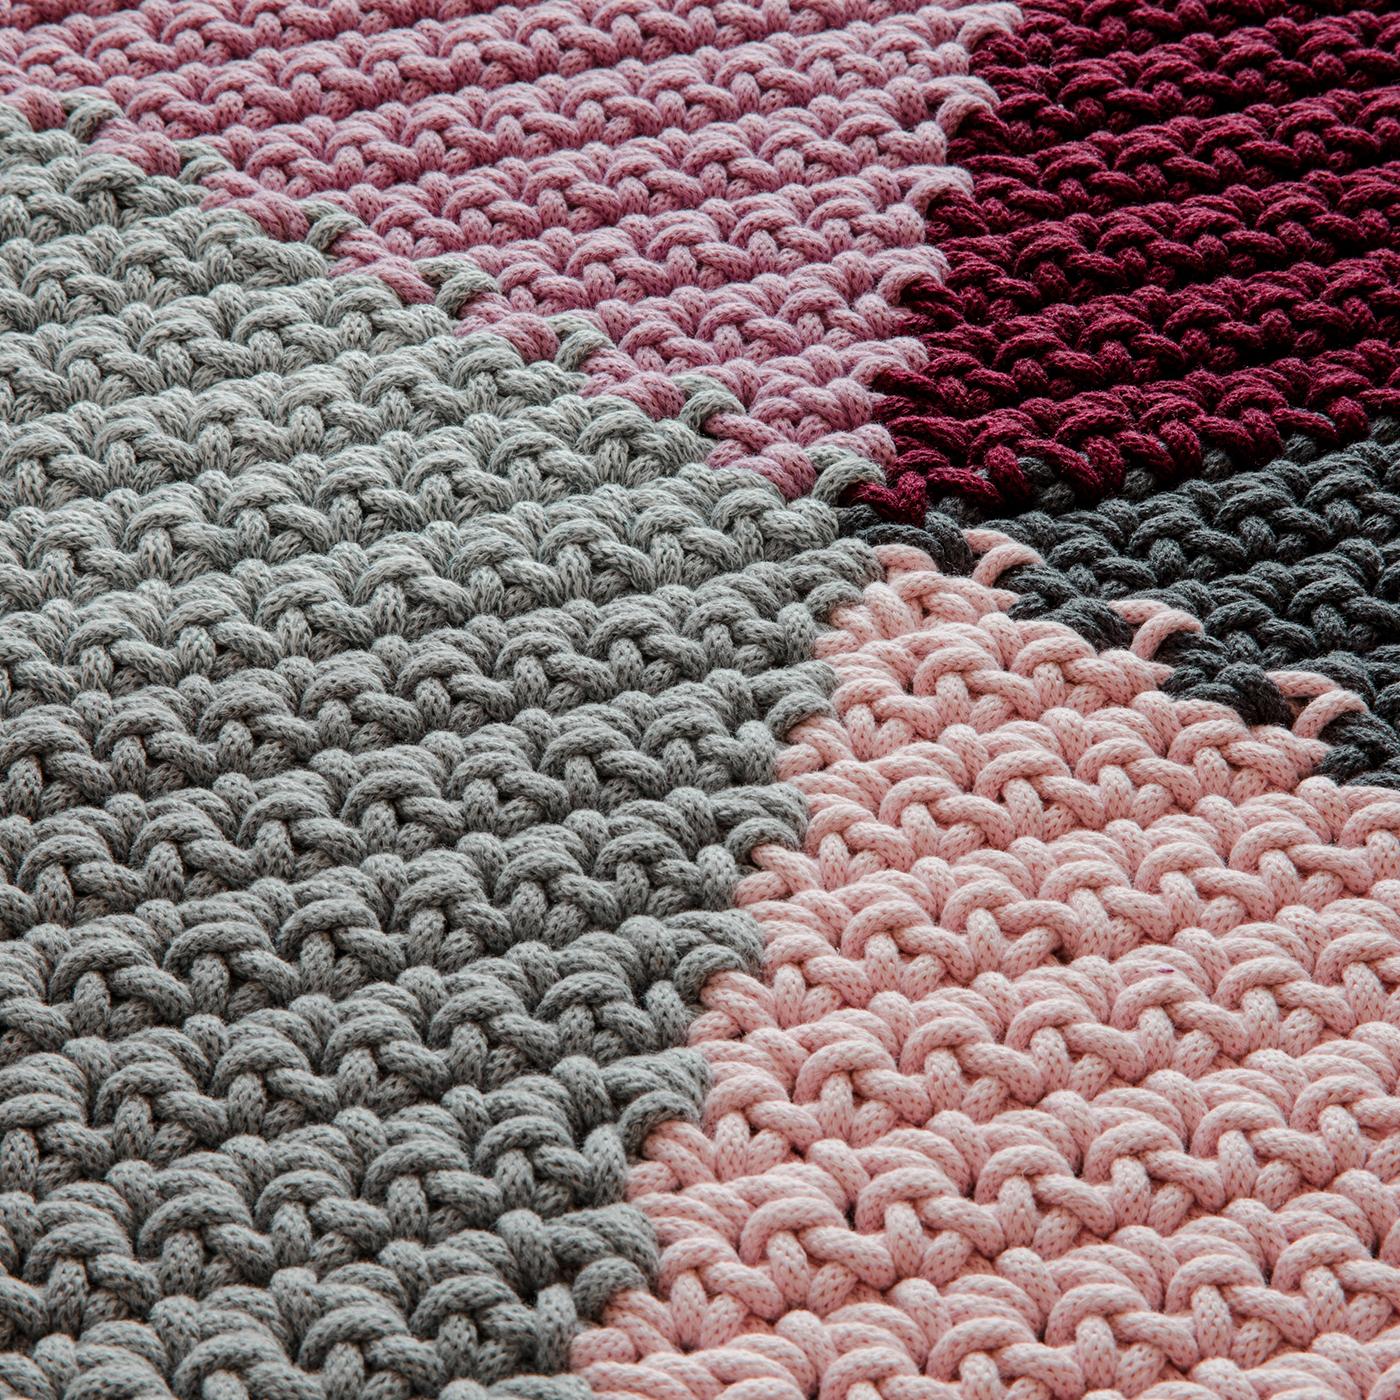 Named after a small seaside town on the Adriatic coast in Abruzzo, this stunning runner rug will add an accent of refined sophistication to a modern bedroom or entryway. Masterfully hand-crocheted from high quality, dye-free recycled cotton fabric